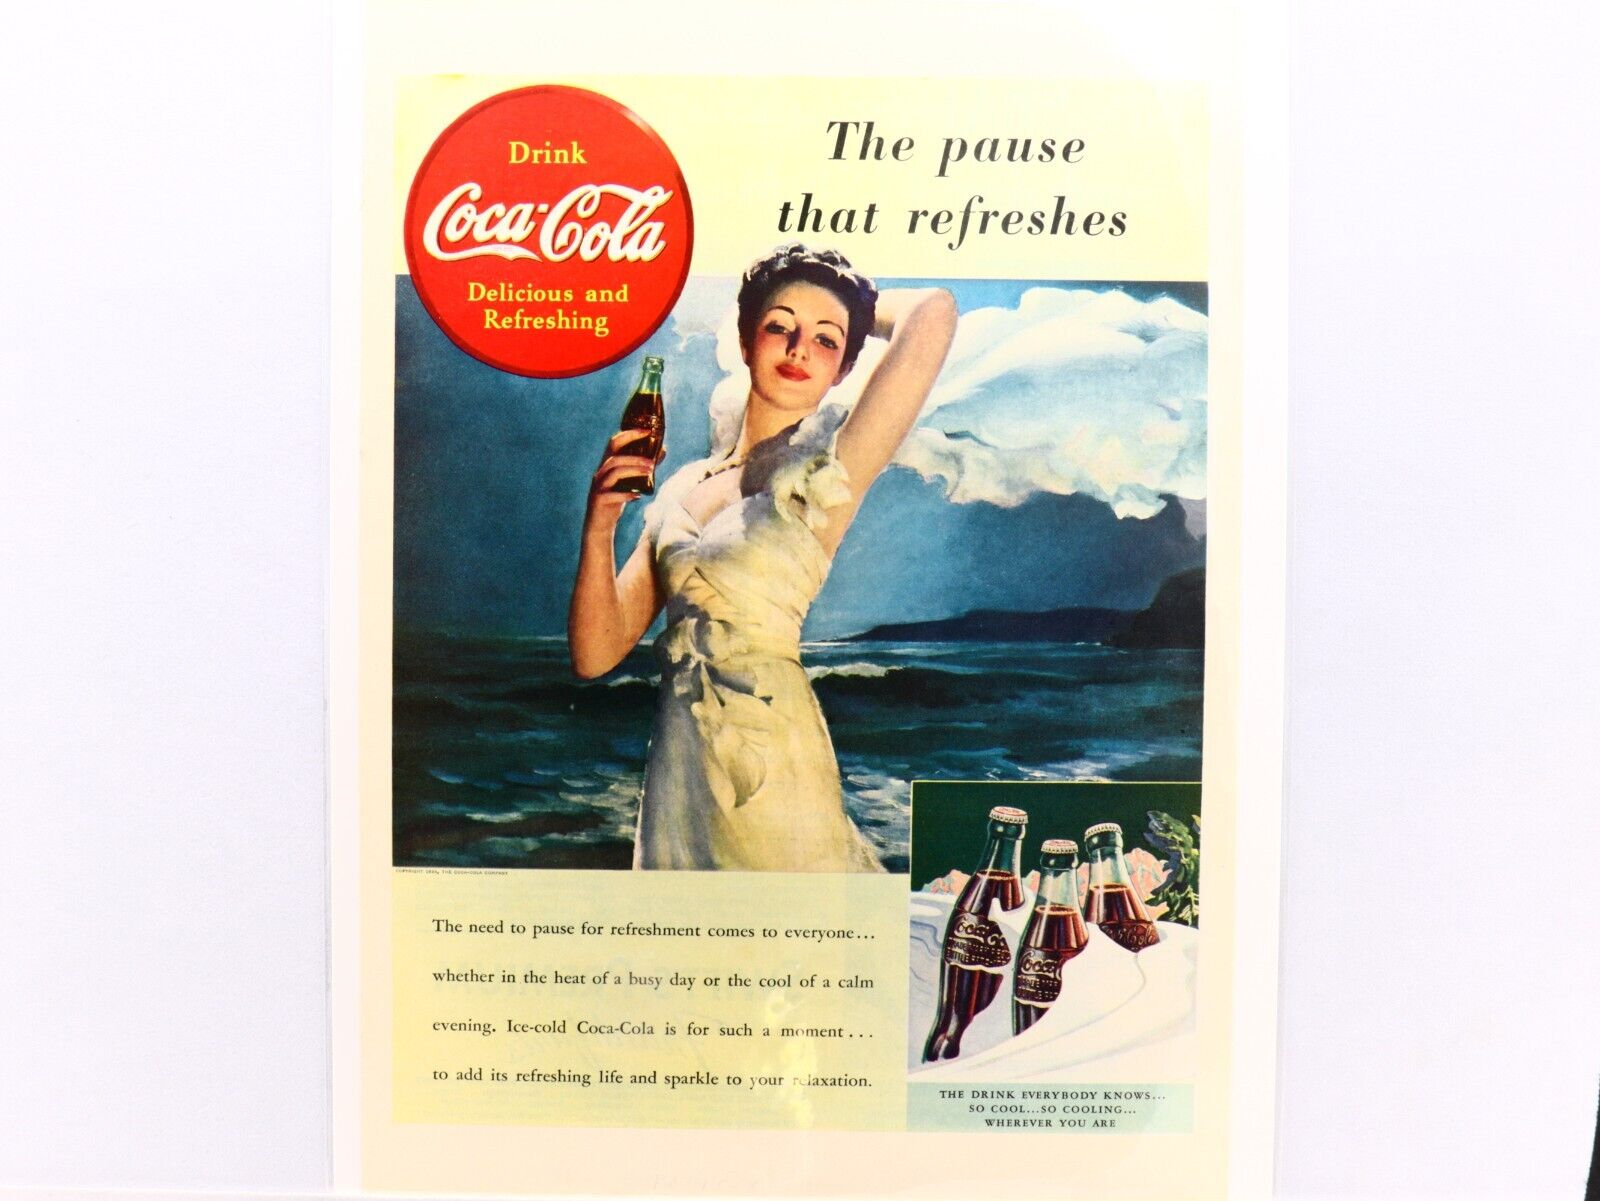 1939 Coca-Cola Ad Featuring A Beautiful Young Woman With Ocean In The Background